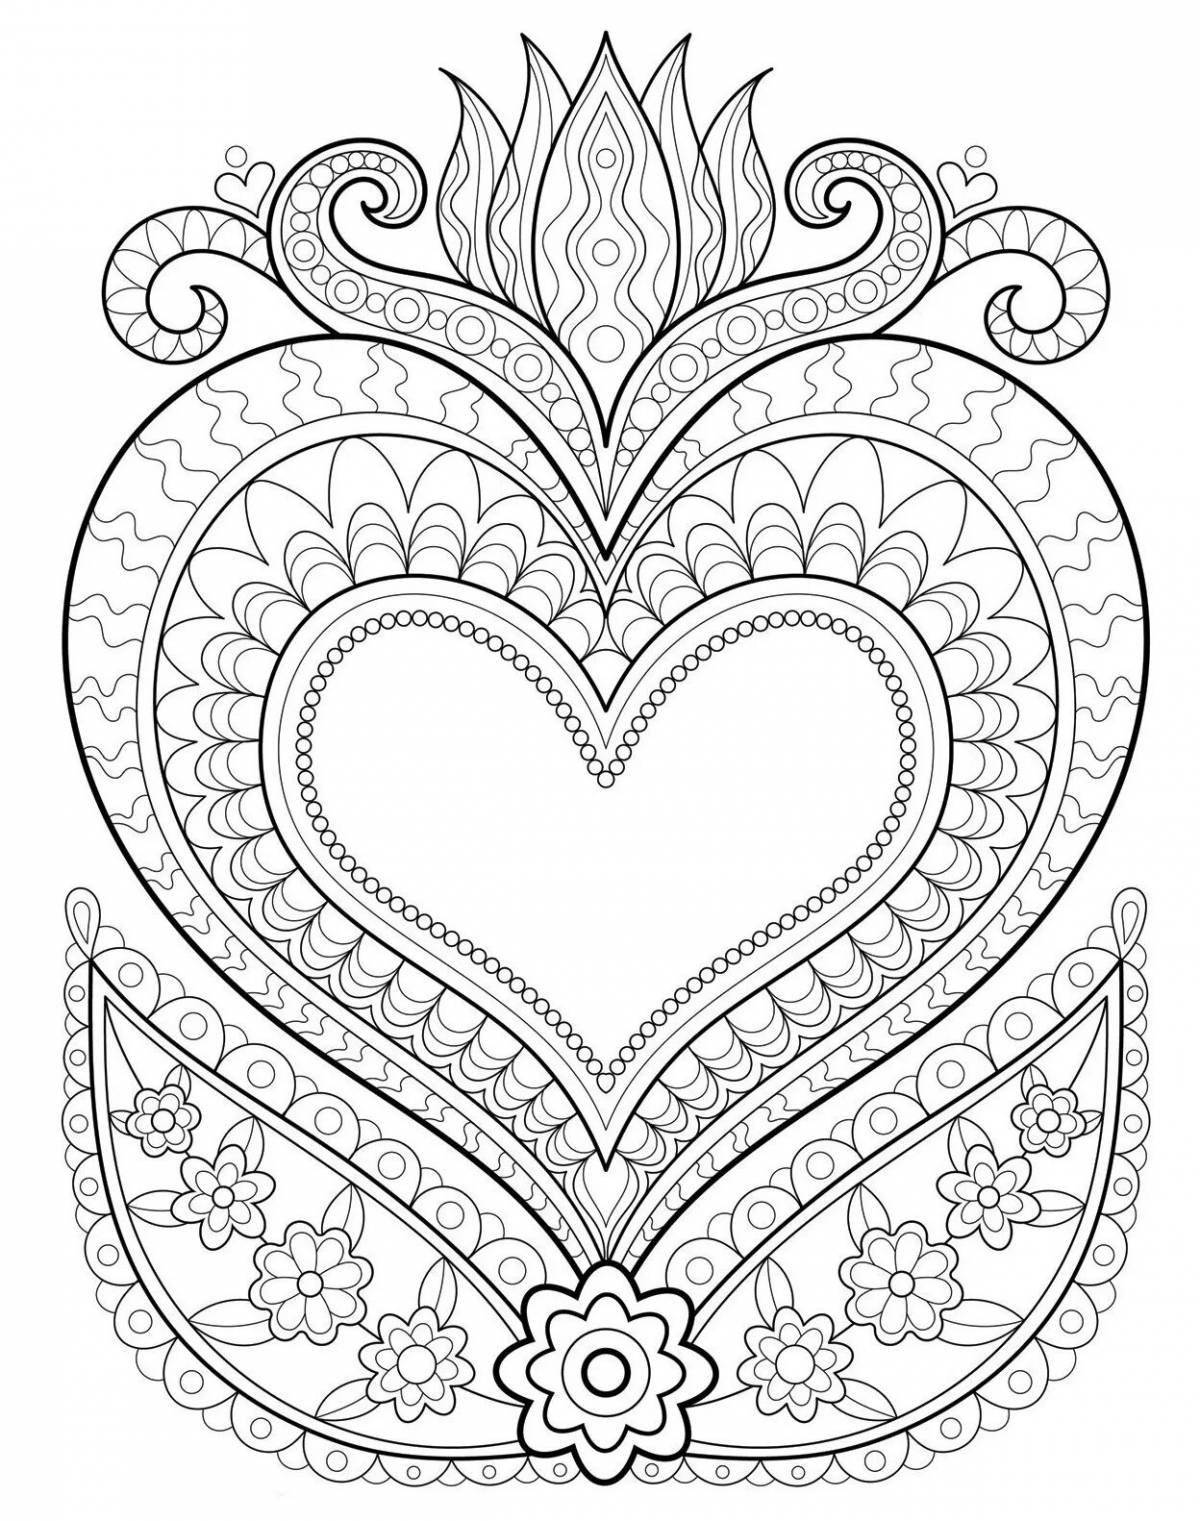 Cheerful heart antistress coloring book